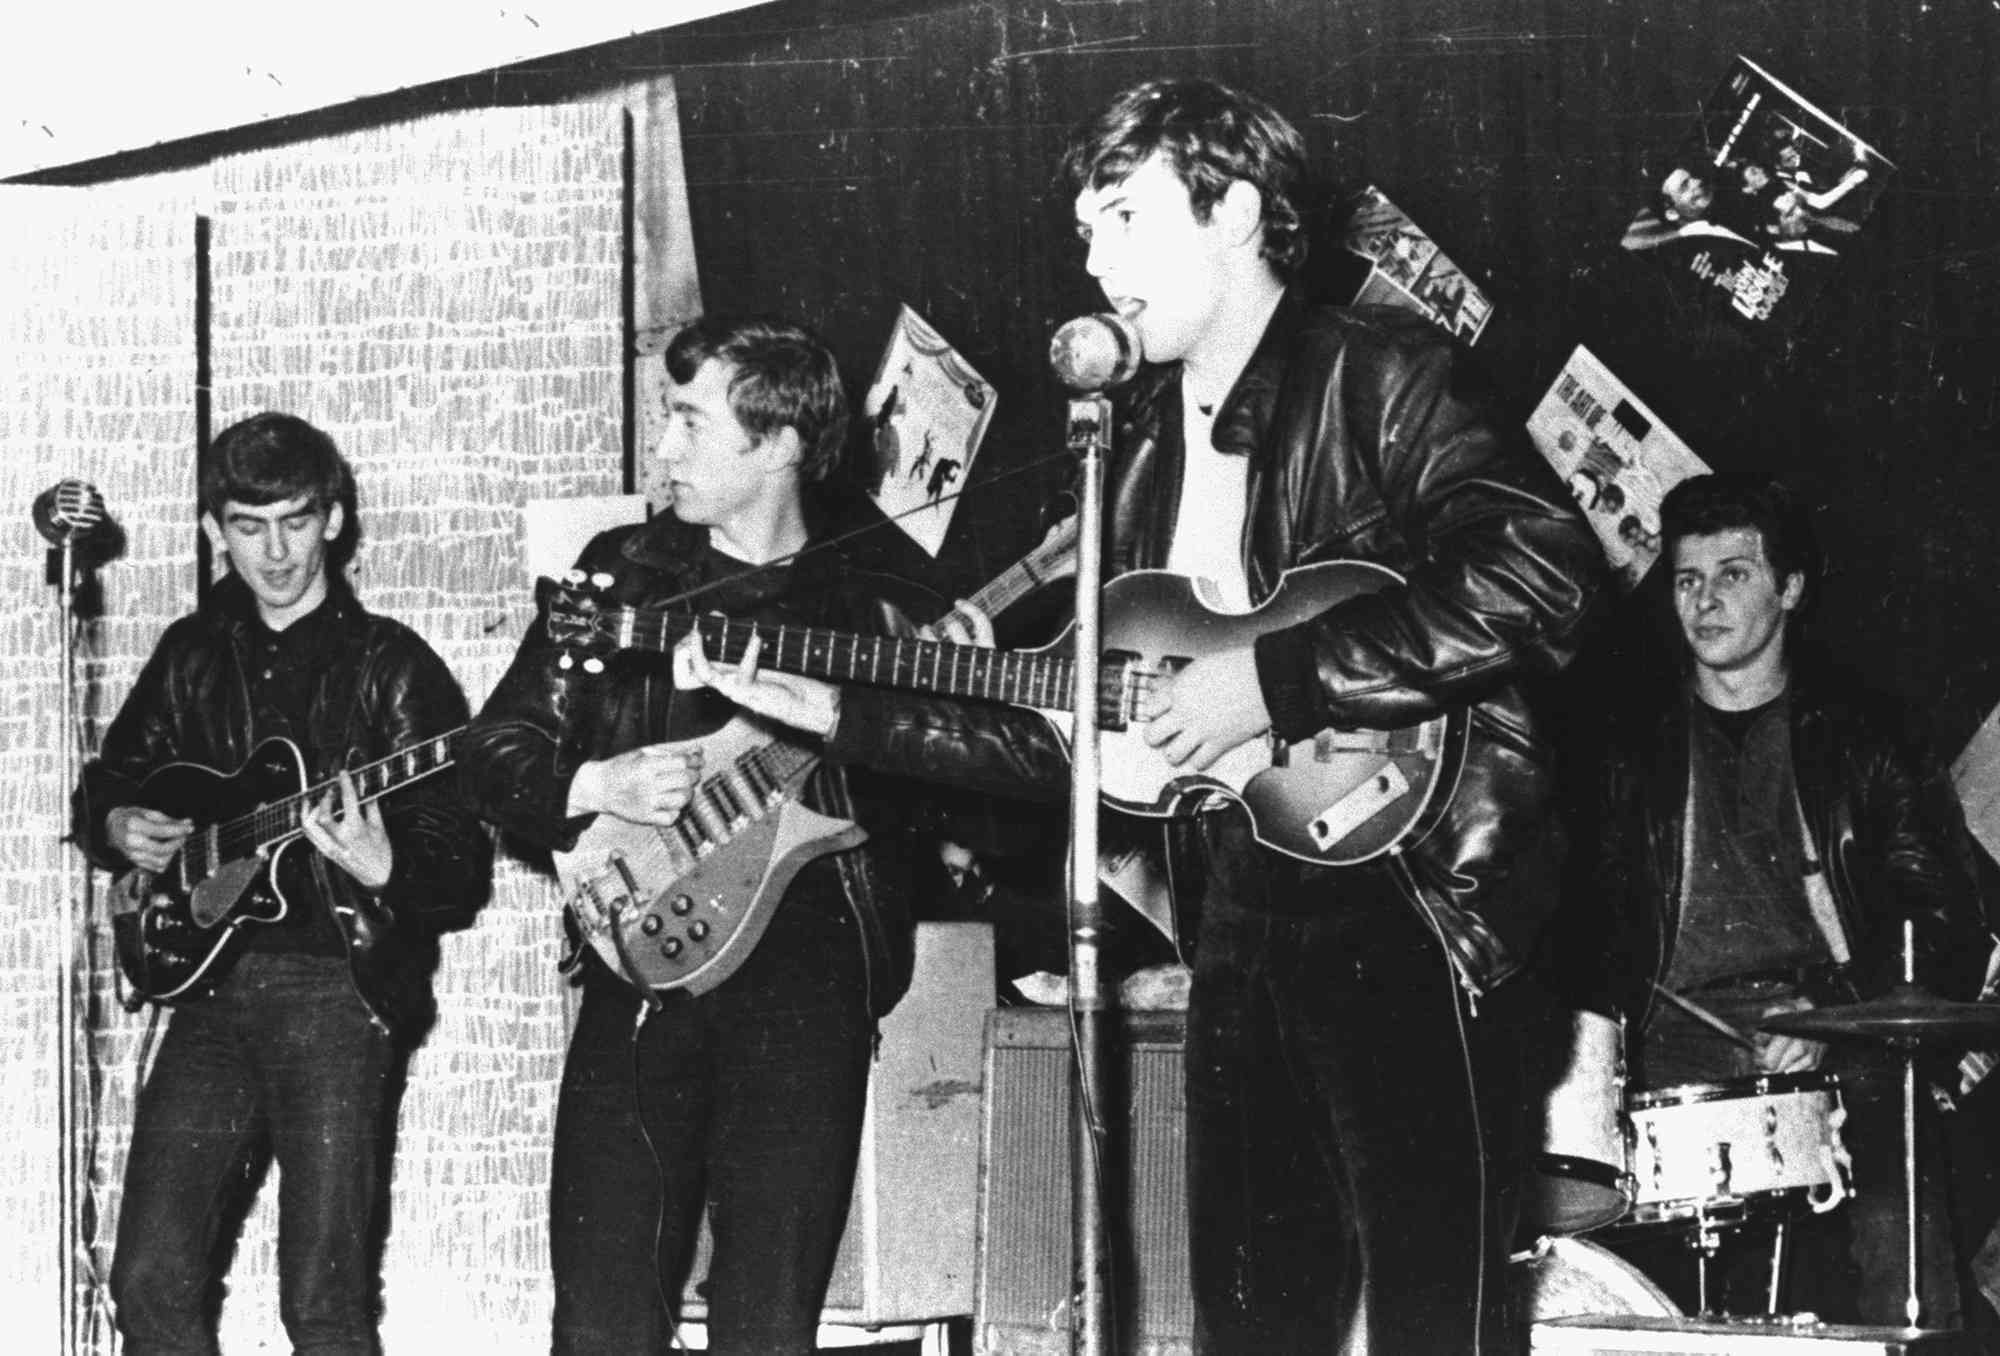 The Beatles perform in a club in Liverpool, England, in 1962.